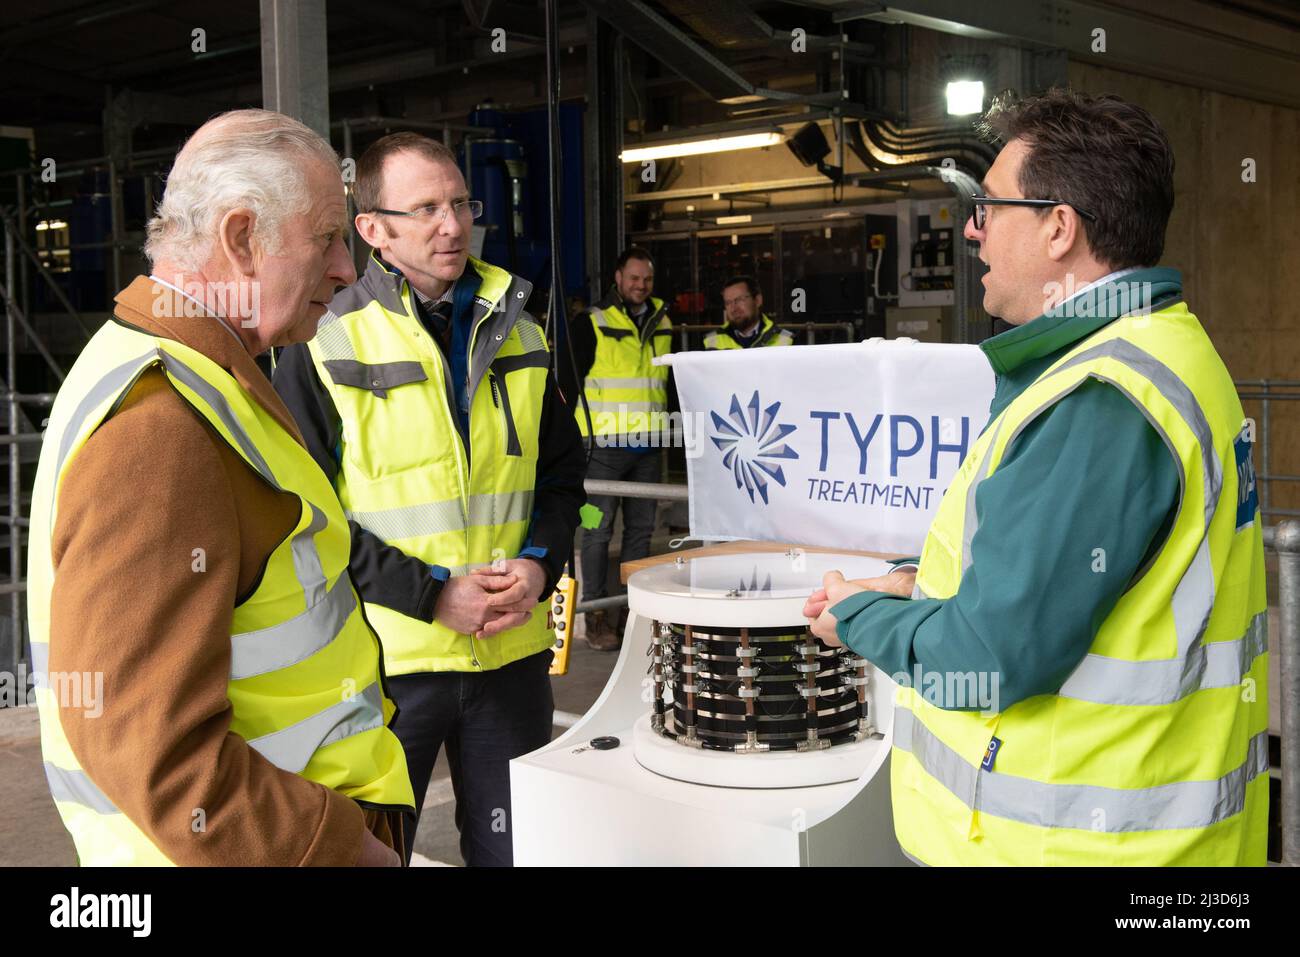 HRH Prince of Wales on his visit to the United Utilities water treatment works in Carlisle 6th April, 2022. On site the Prince of Wales saw the worlds first ever municipal LED disinfection system developed by Typhon Treatment Systems Ltd. in operation. The Prince met with employees from United Utilities and Typhon and discussed how the award winning system  could help address safe access to water globally. Stock Photo